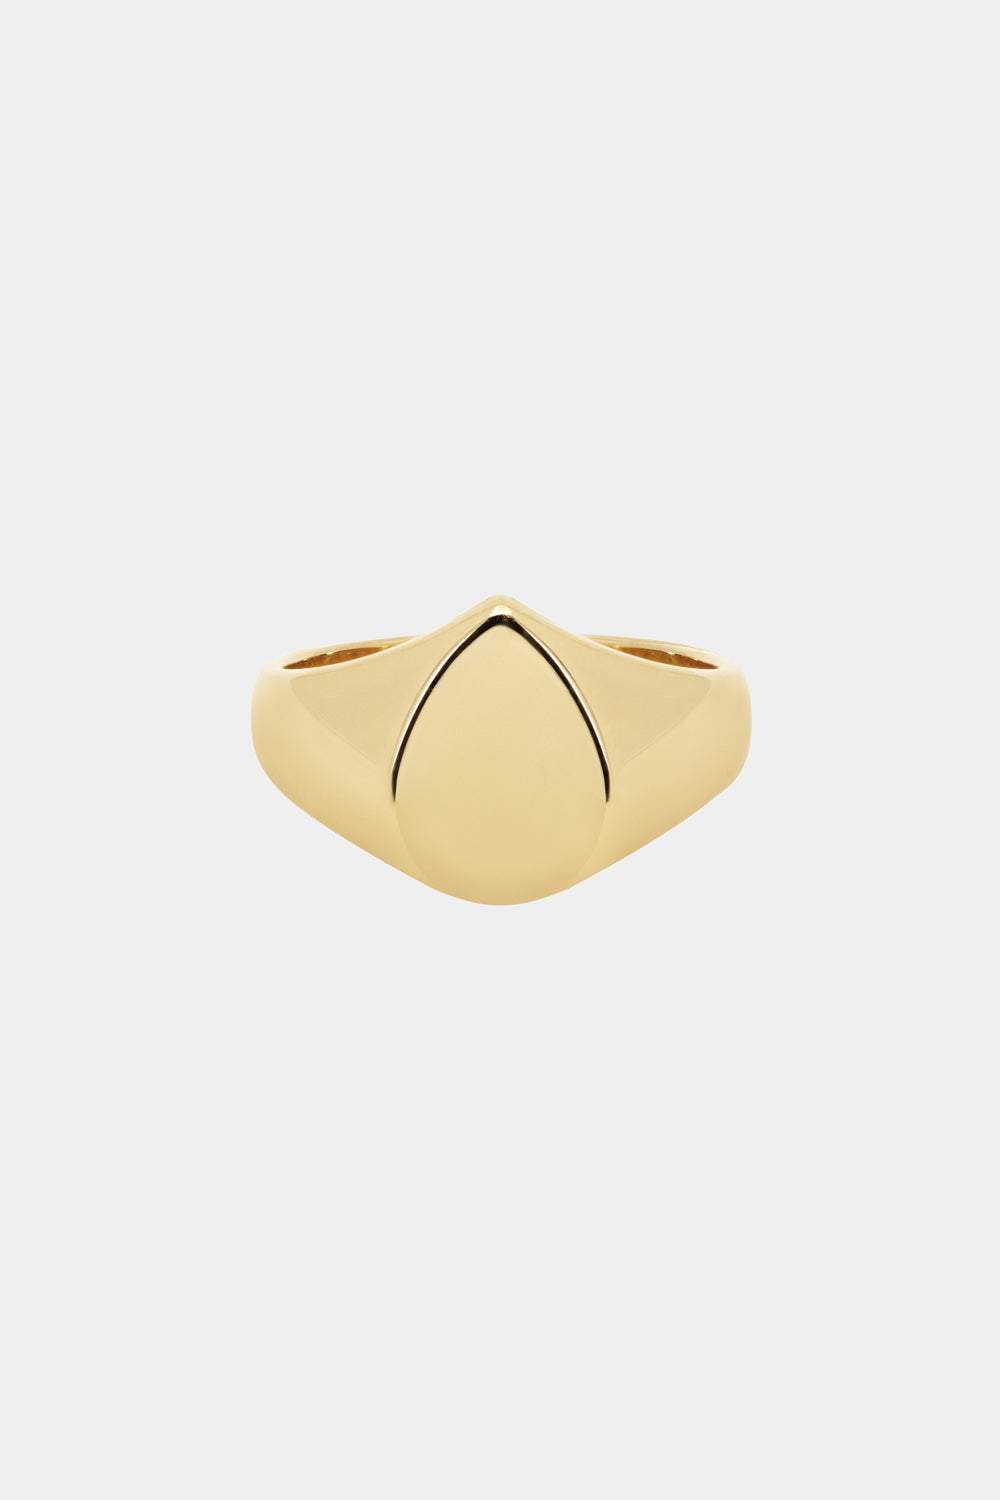 Pear Signet Ring | Yellow Gold, More Options Available